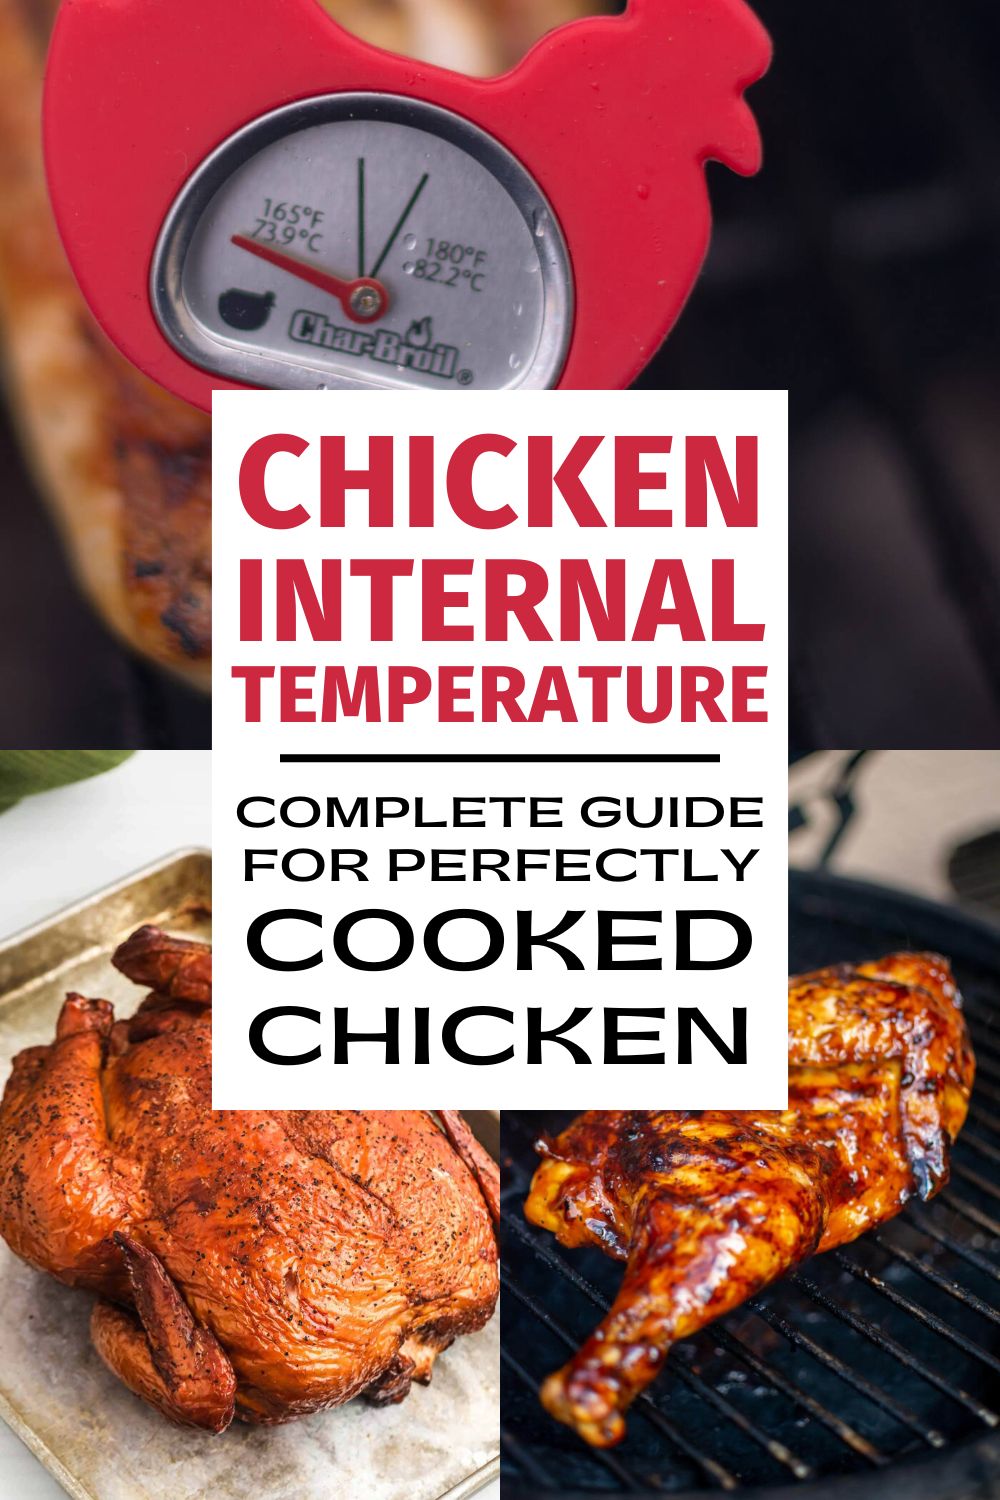 Chicken Internal Temperature - Complete Guide For Perfectly Cooked Chicken